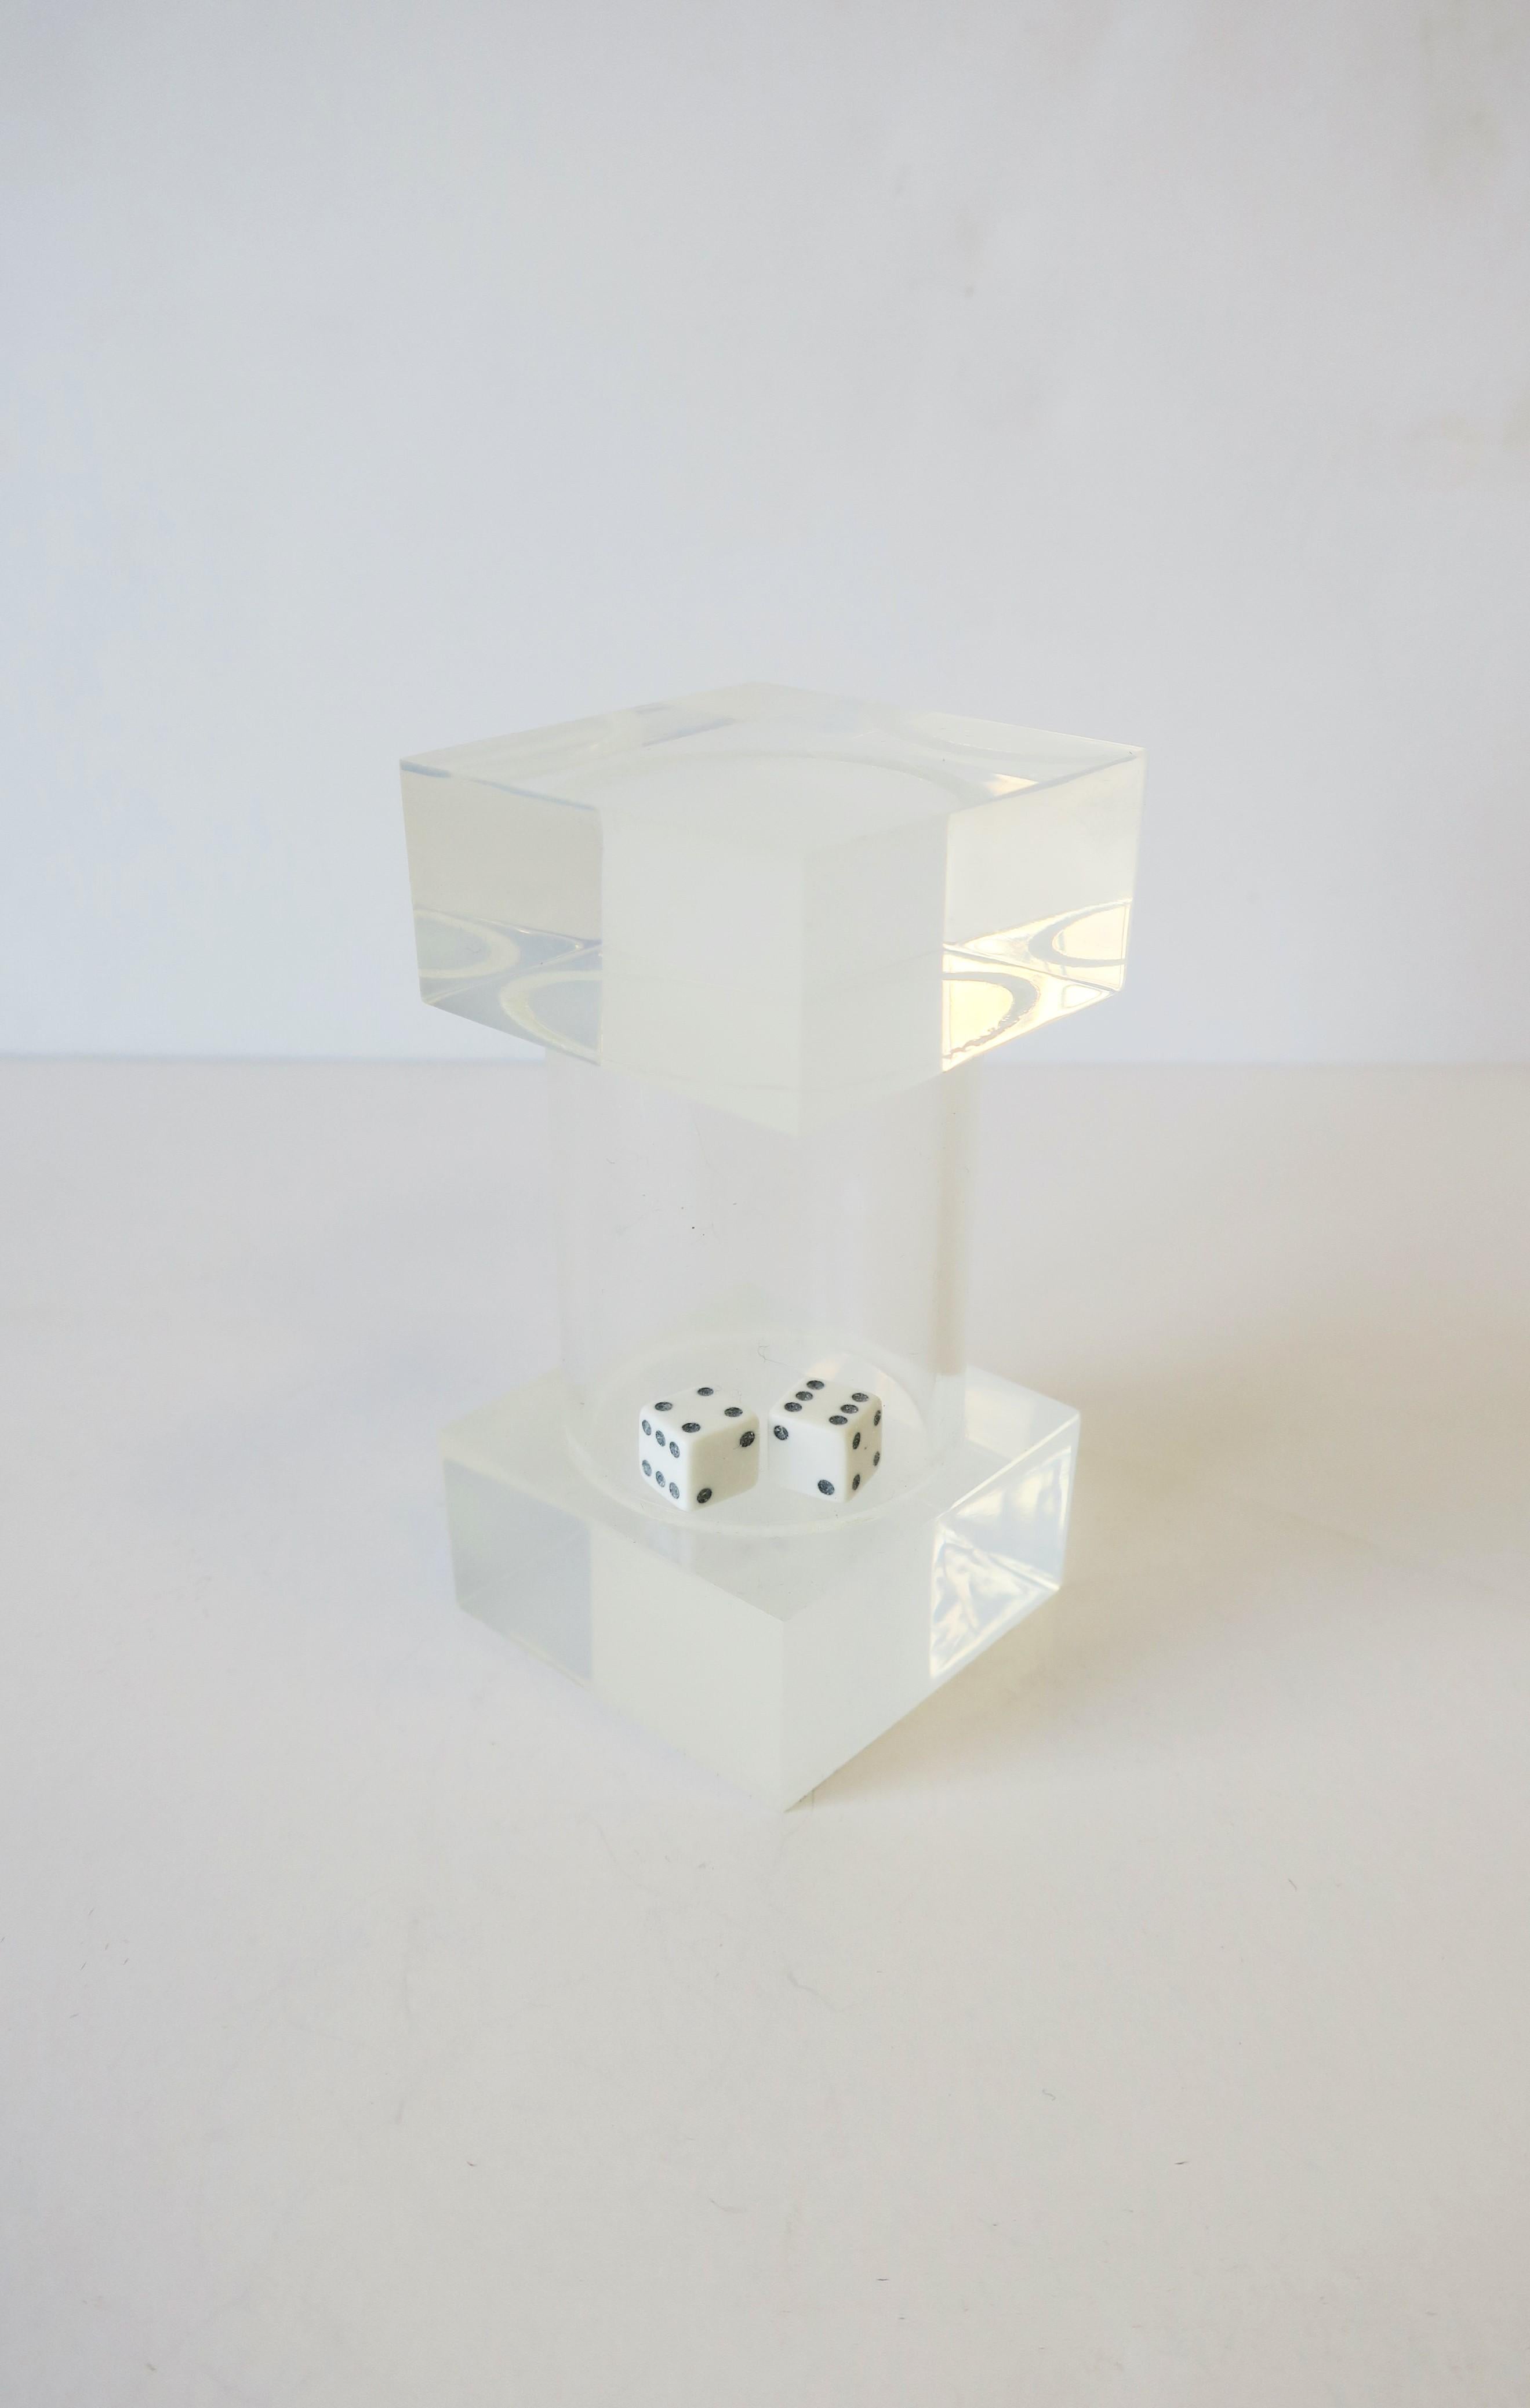 A Lucite dice Shaker the Modern style or Postmodern period. A pair of black and white dice encased in a cylindrical Lucite tube with square Lucite block ends. Item can be used for card games, as a decorative piece, desk accessory, etc.

  